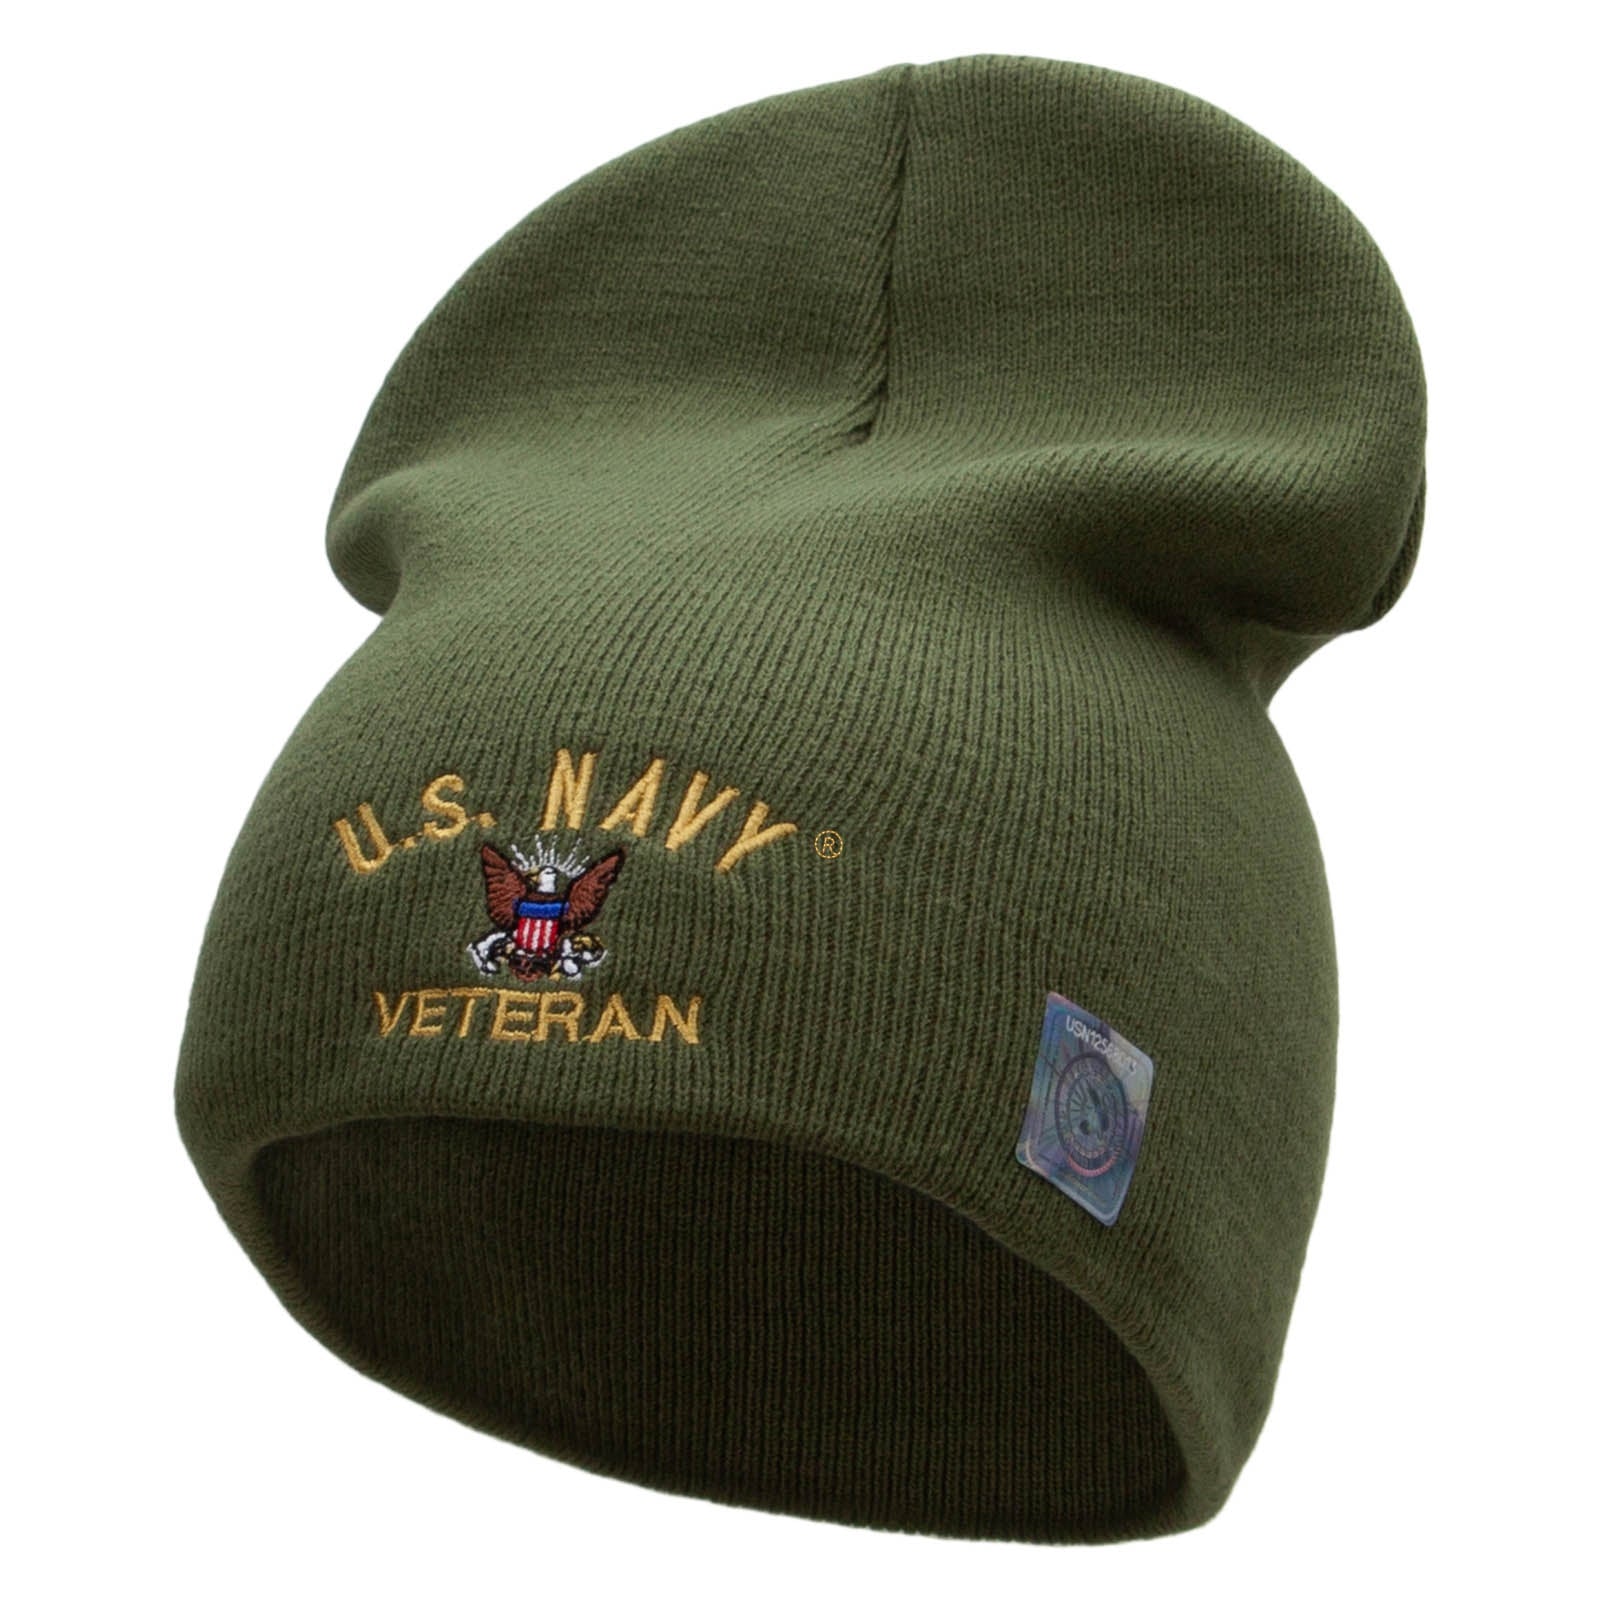 Licensed US Navy Veteran Embroidered Short Beanie Made in USA - Olive OSFM